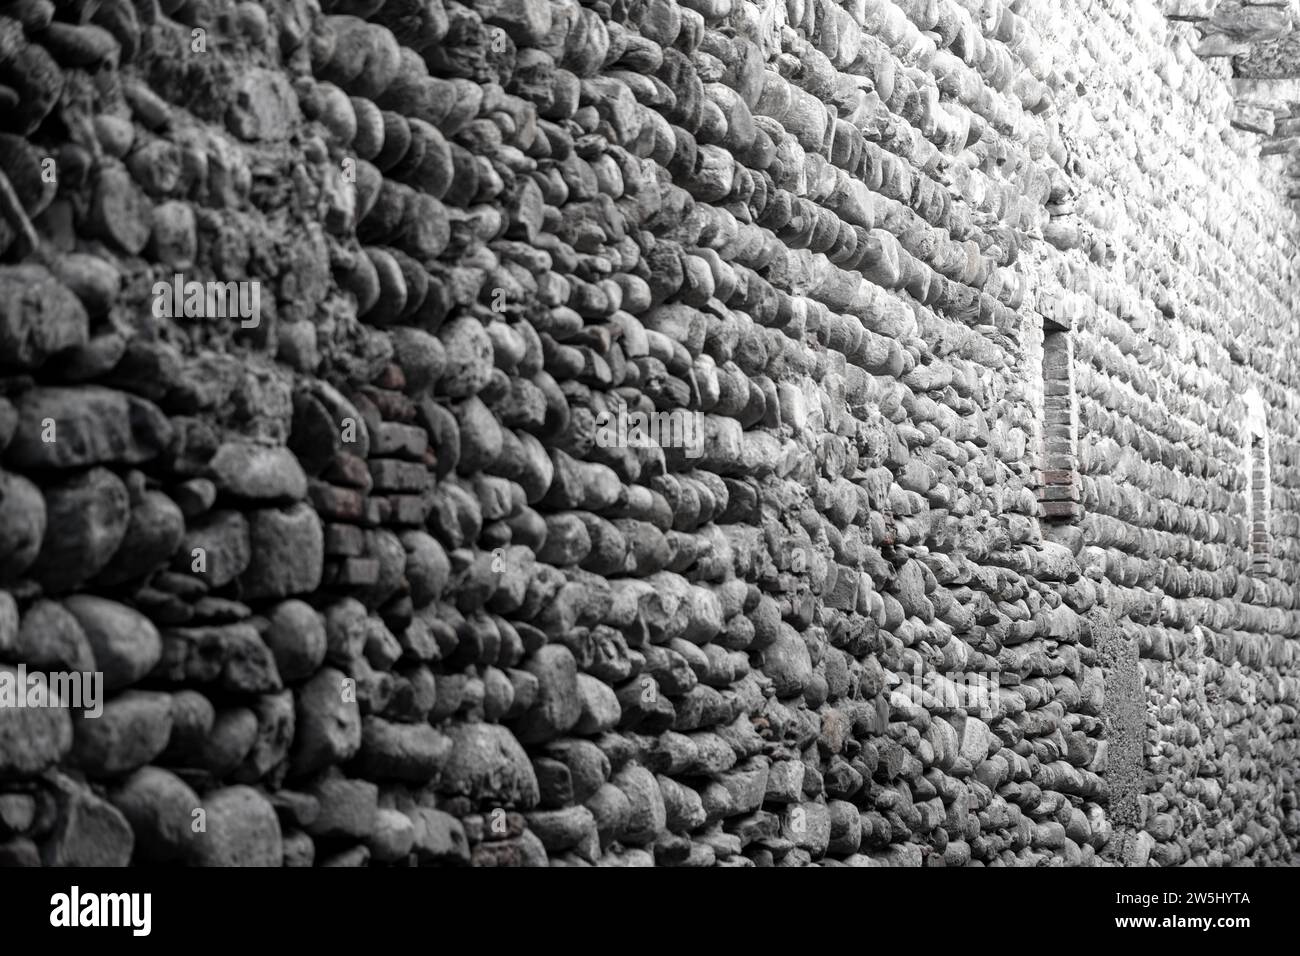 A stone wall made of coarse natural stone or fieldstone with small windows. The picture is rather colorless. Stock Photo